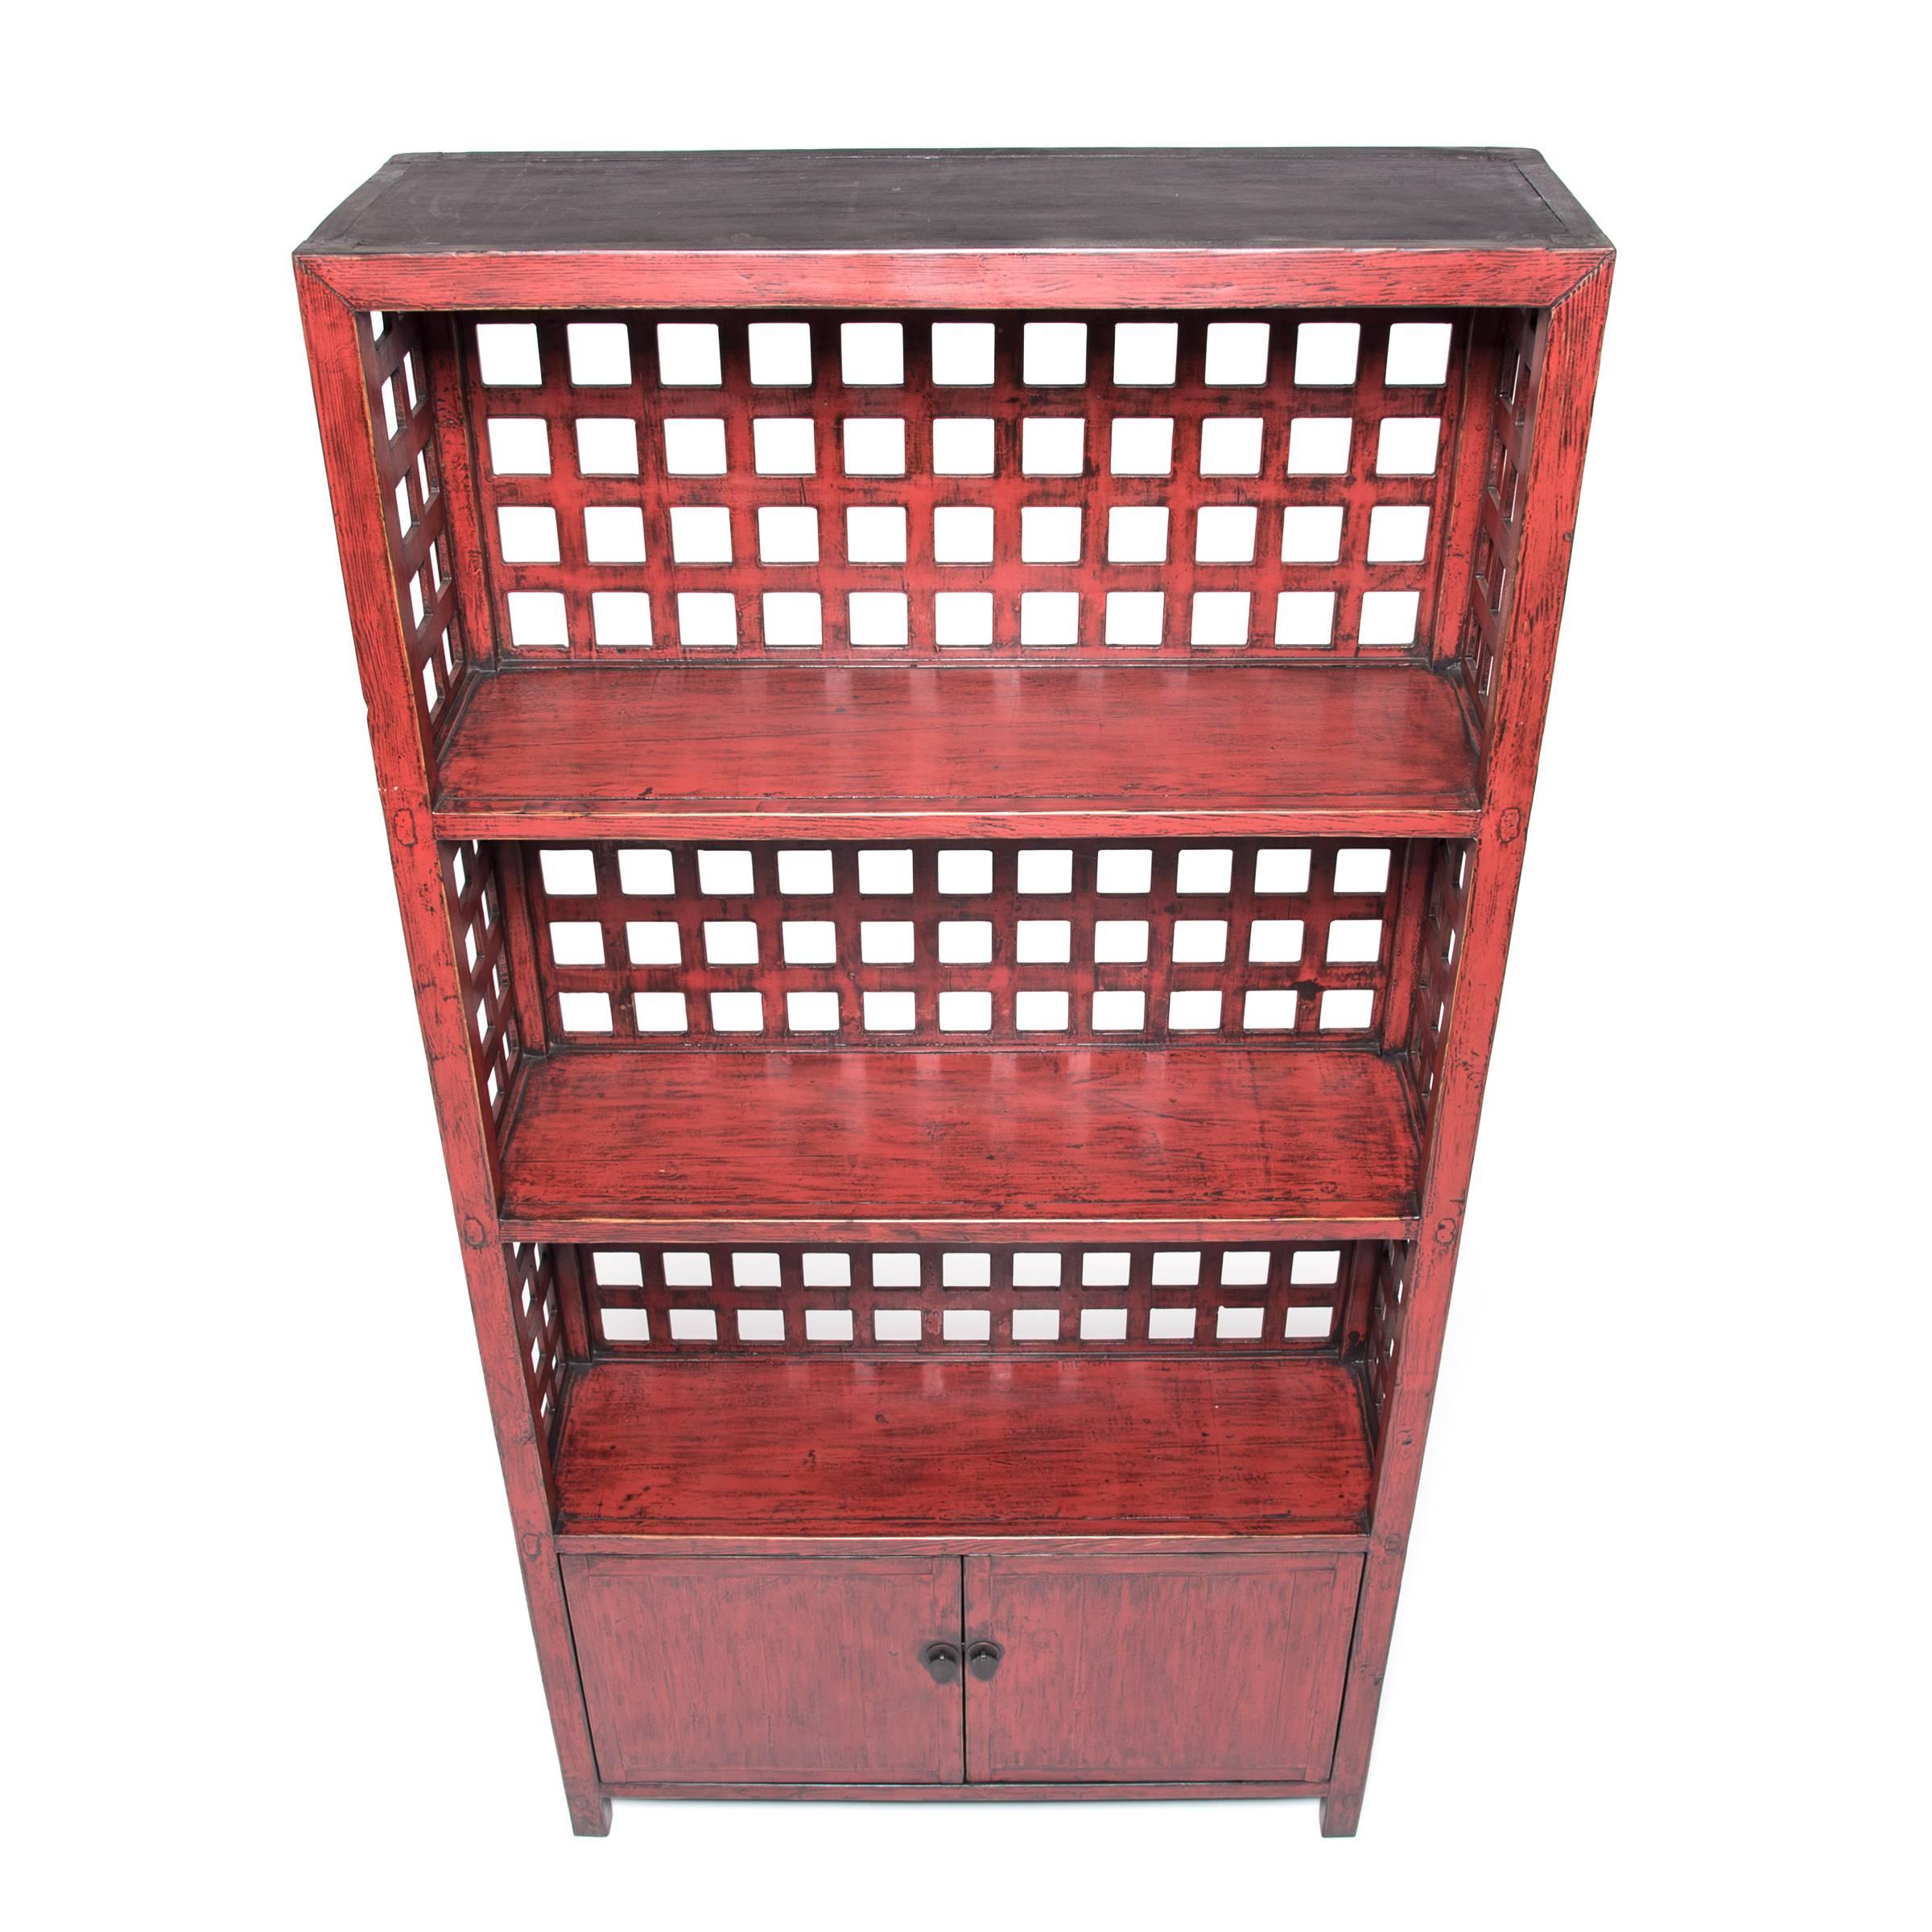 Inspired by the timeless design of Qing-dynasty furniture, our talented carpenters married a lattice window to a bookcase to stunning effect. The airy lattice back plays up on the hybrid’s mix of closed and open storage, while the red lacquer brings